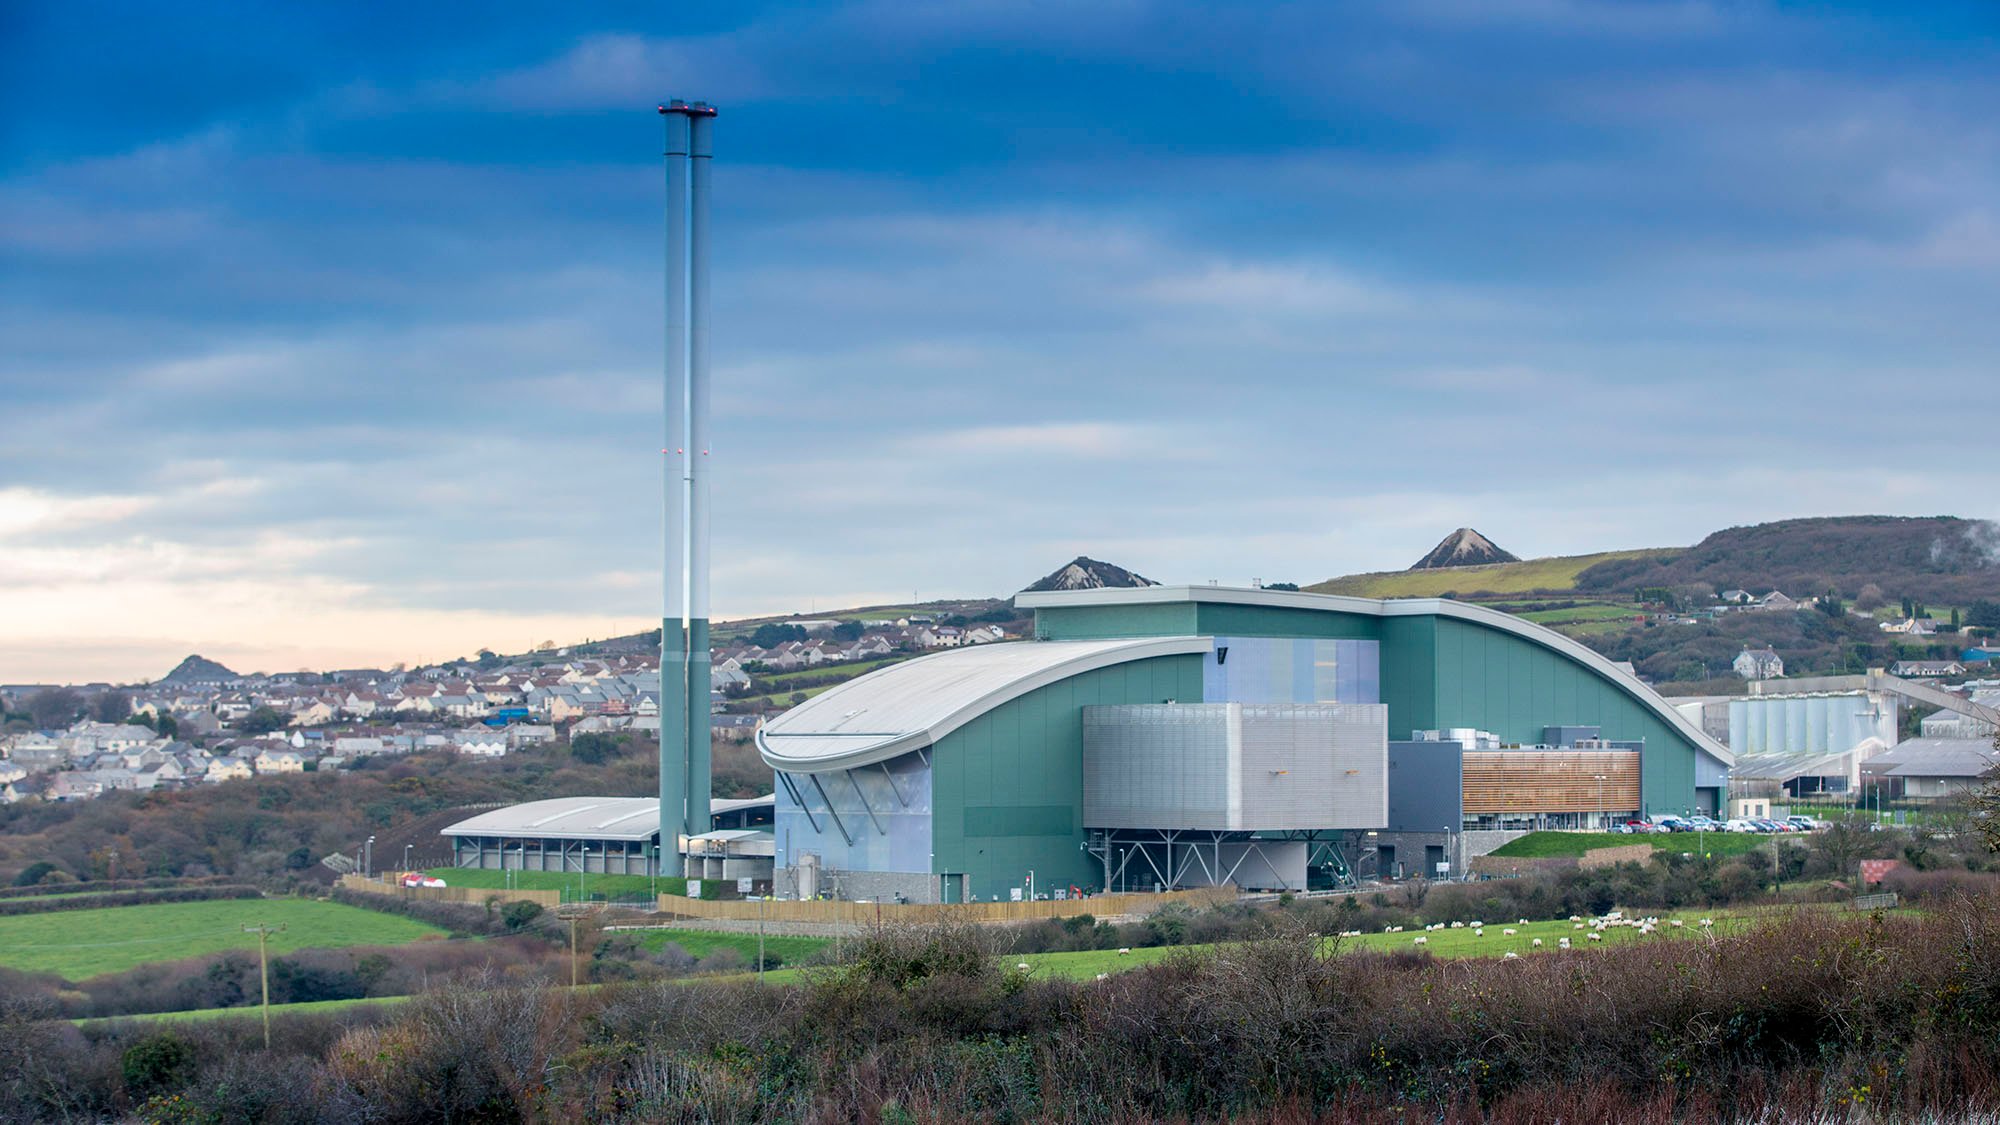 Cornwall energy recovery centre